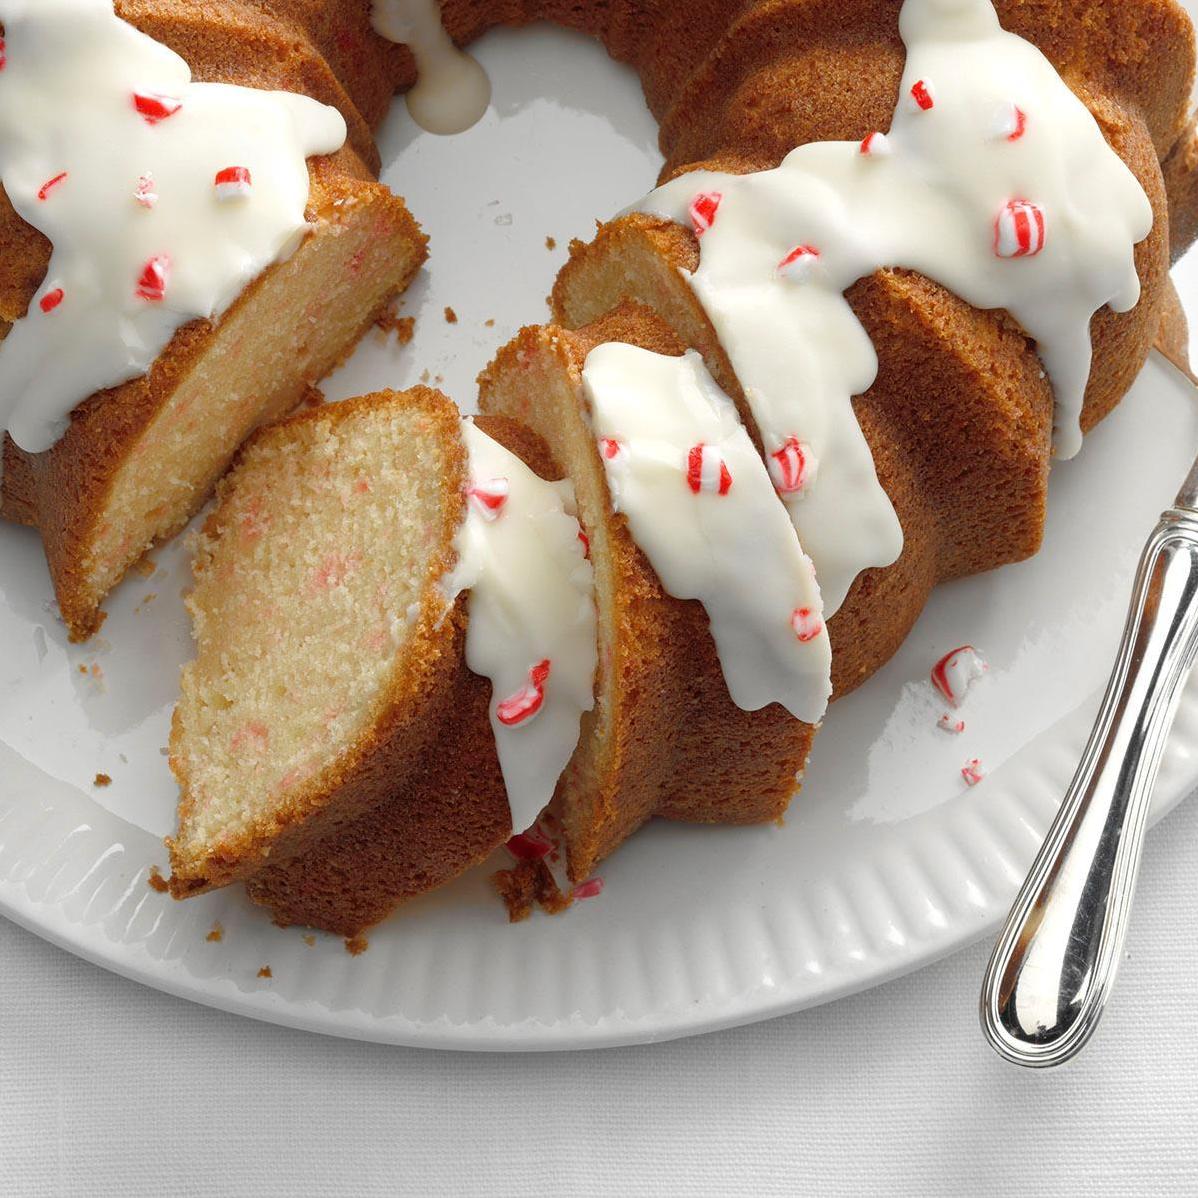  Nothing screams Christmas like candy canes and moist pound cake.